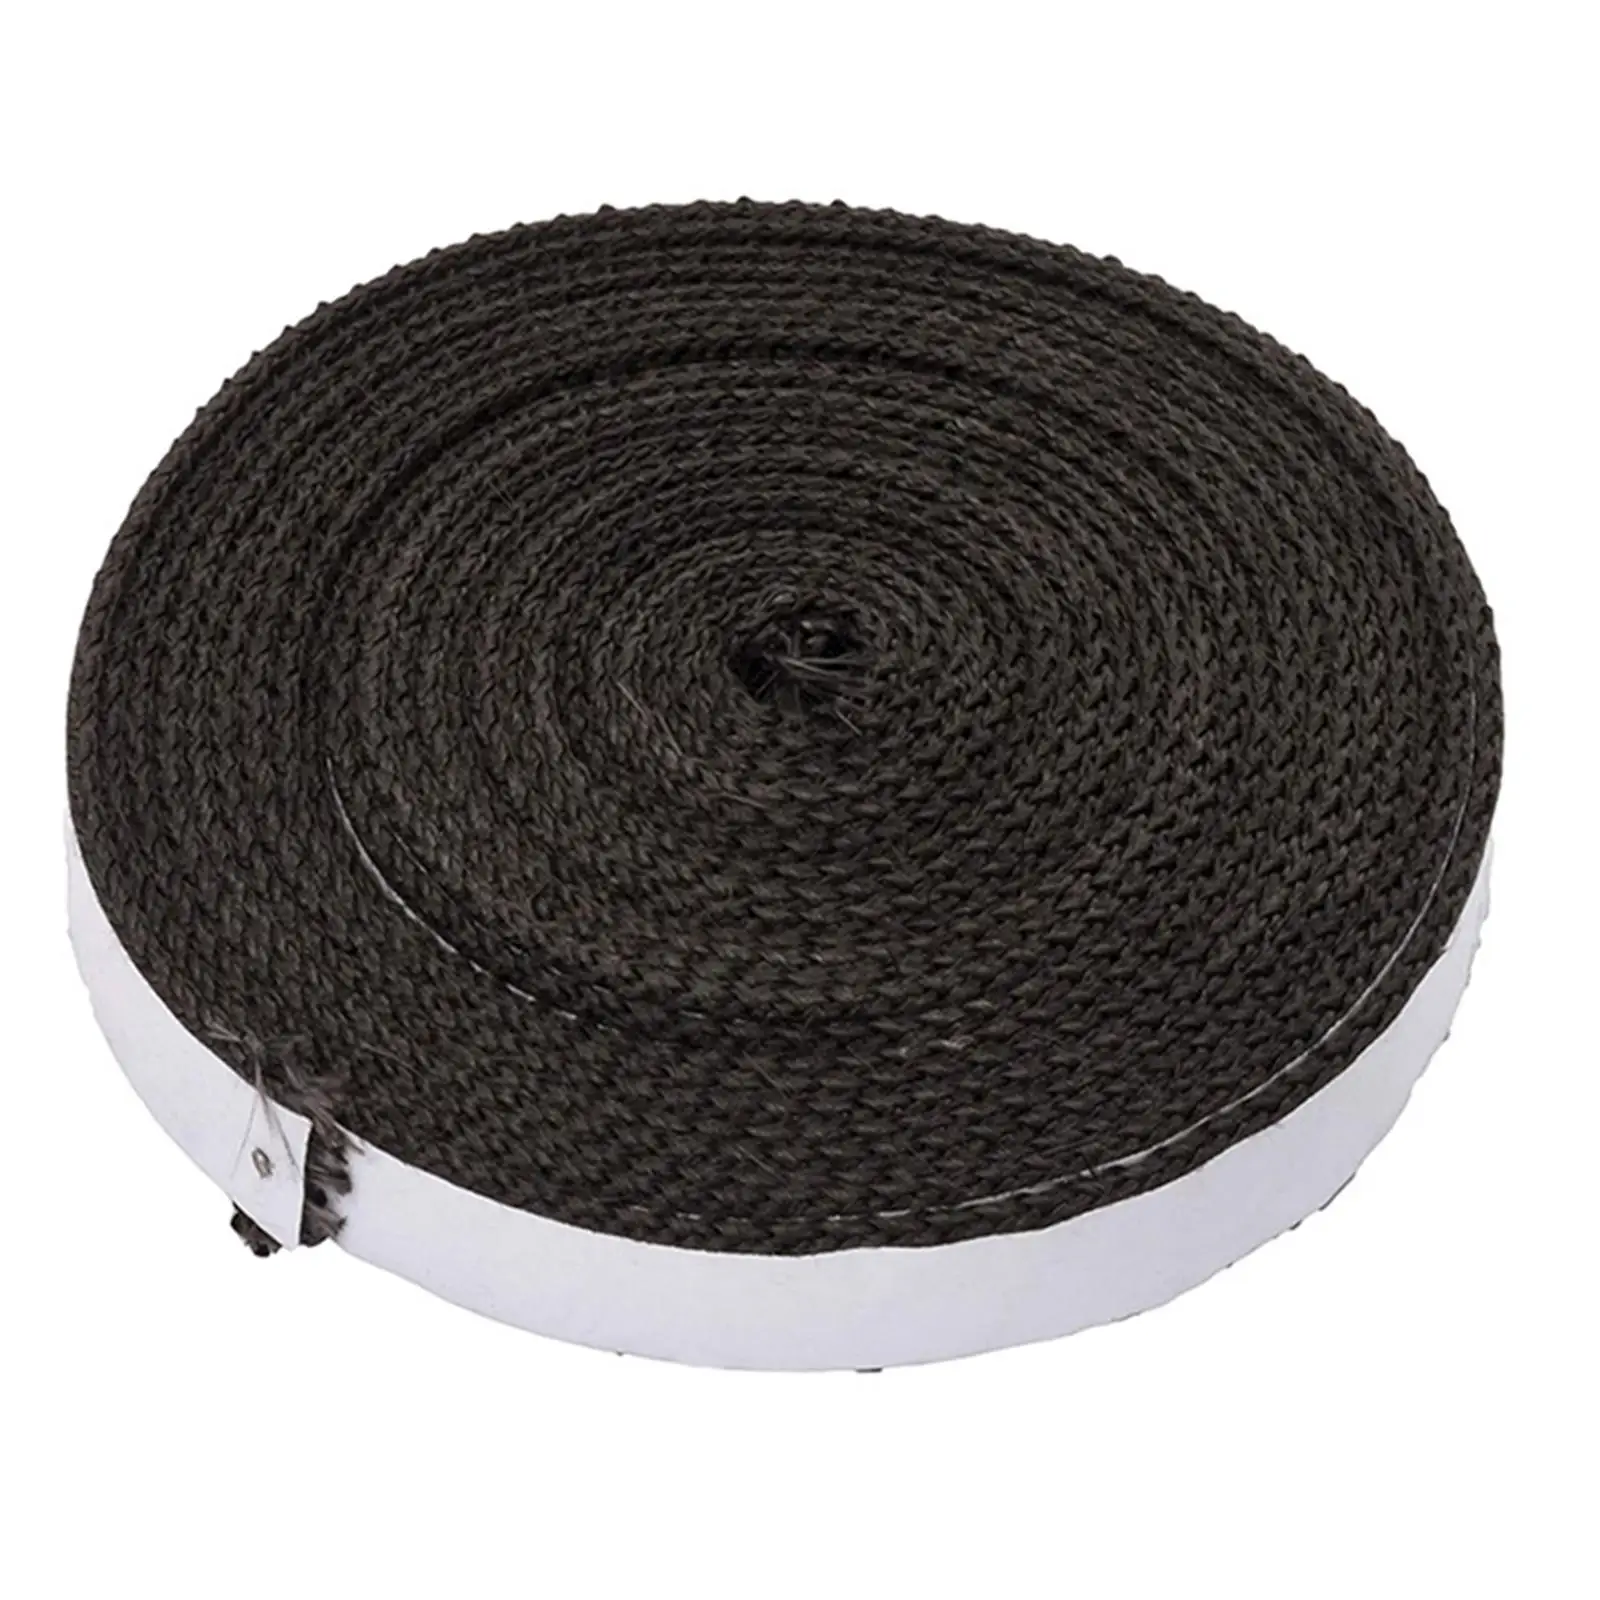 BBQ Gasket High Temperature Resistant Seal Strip 4.5M Sealing Tape Seal Washer for Chimney Lid Outdoor BBQ Accessories